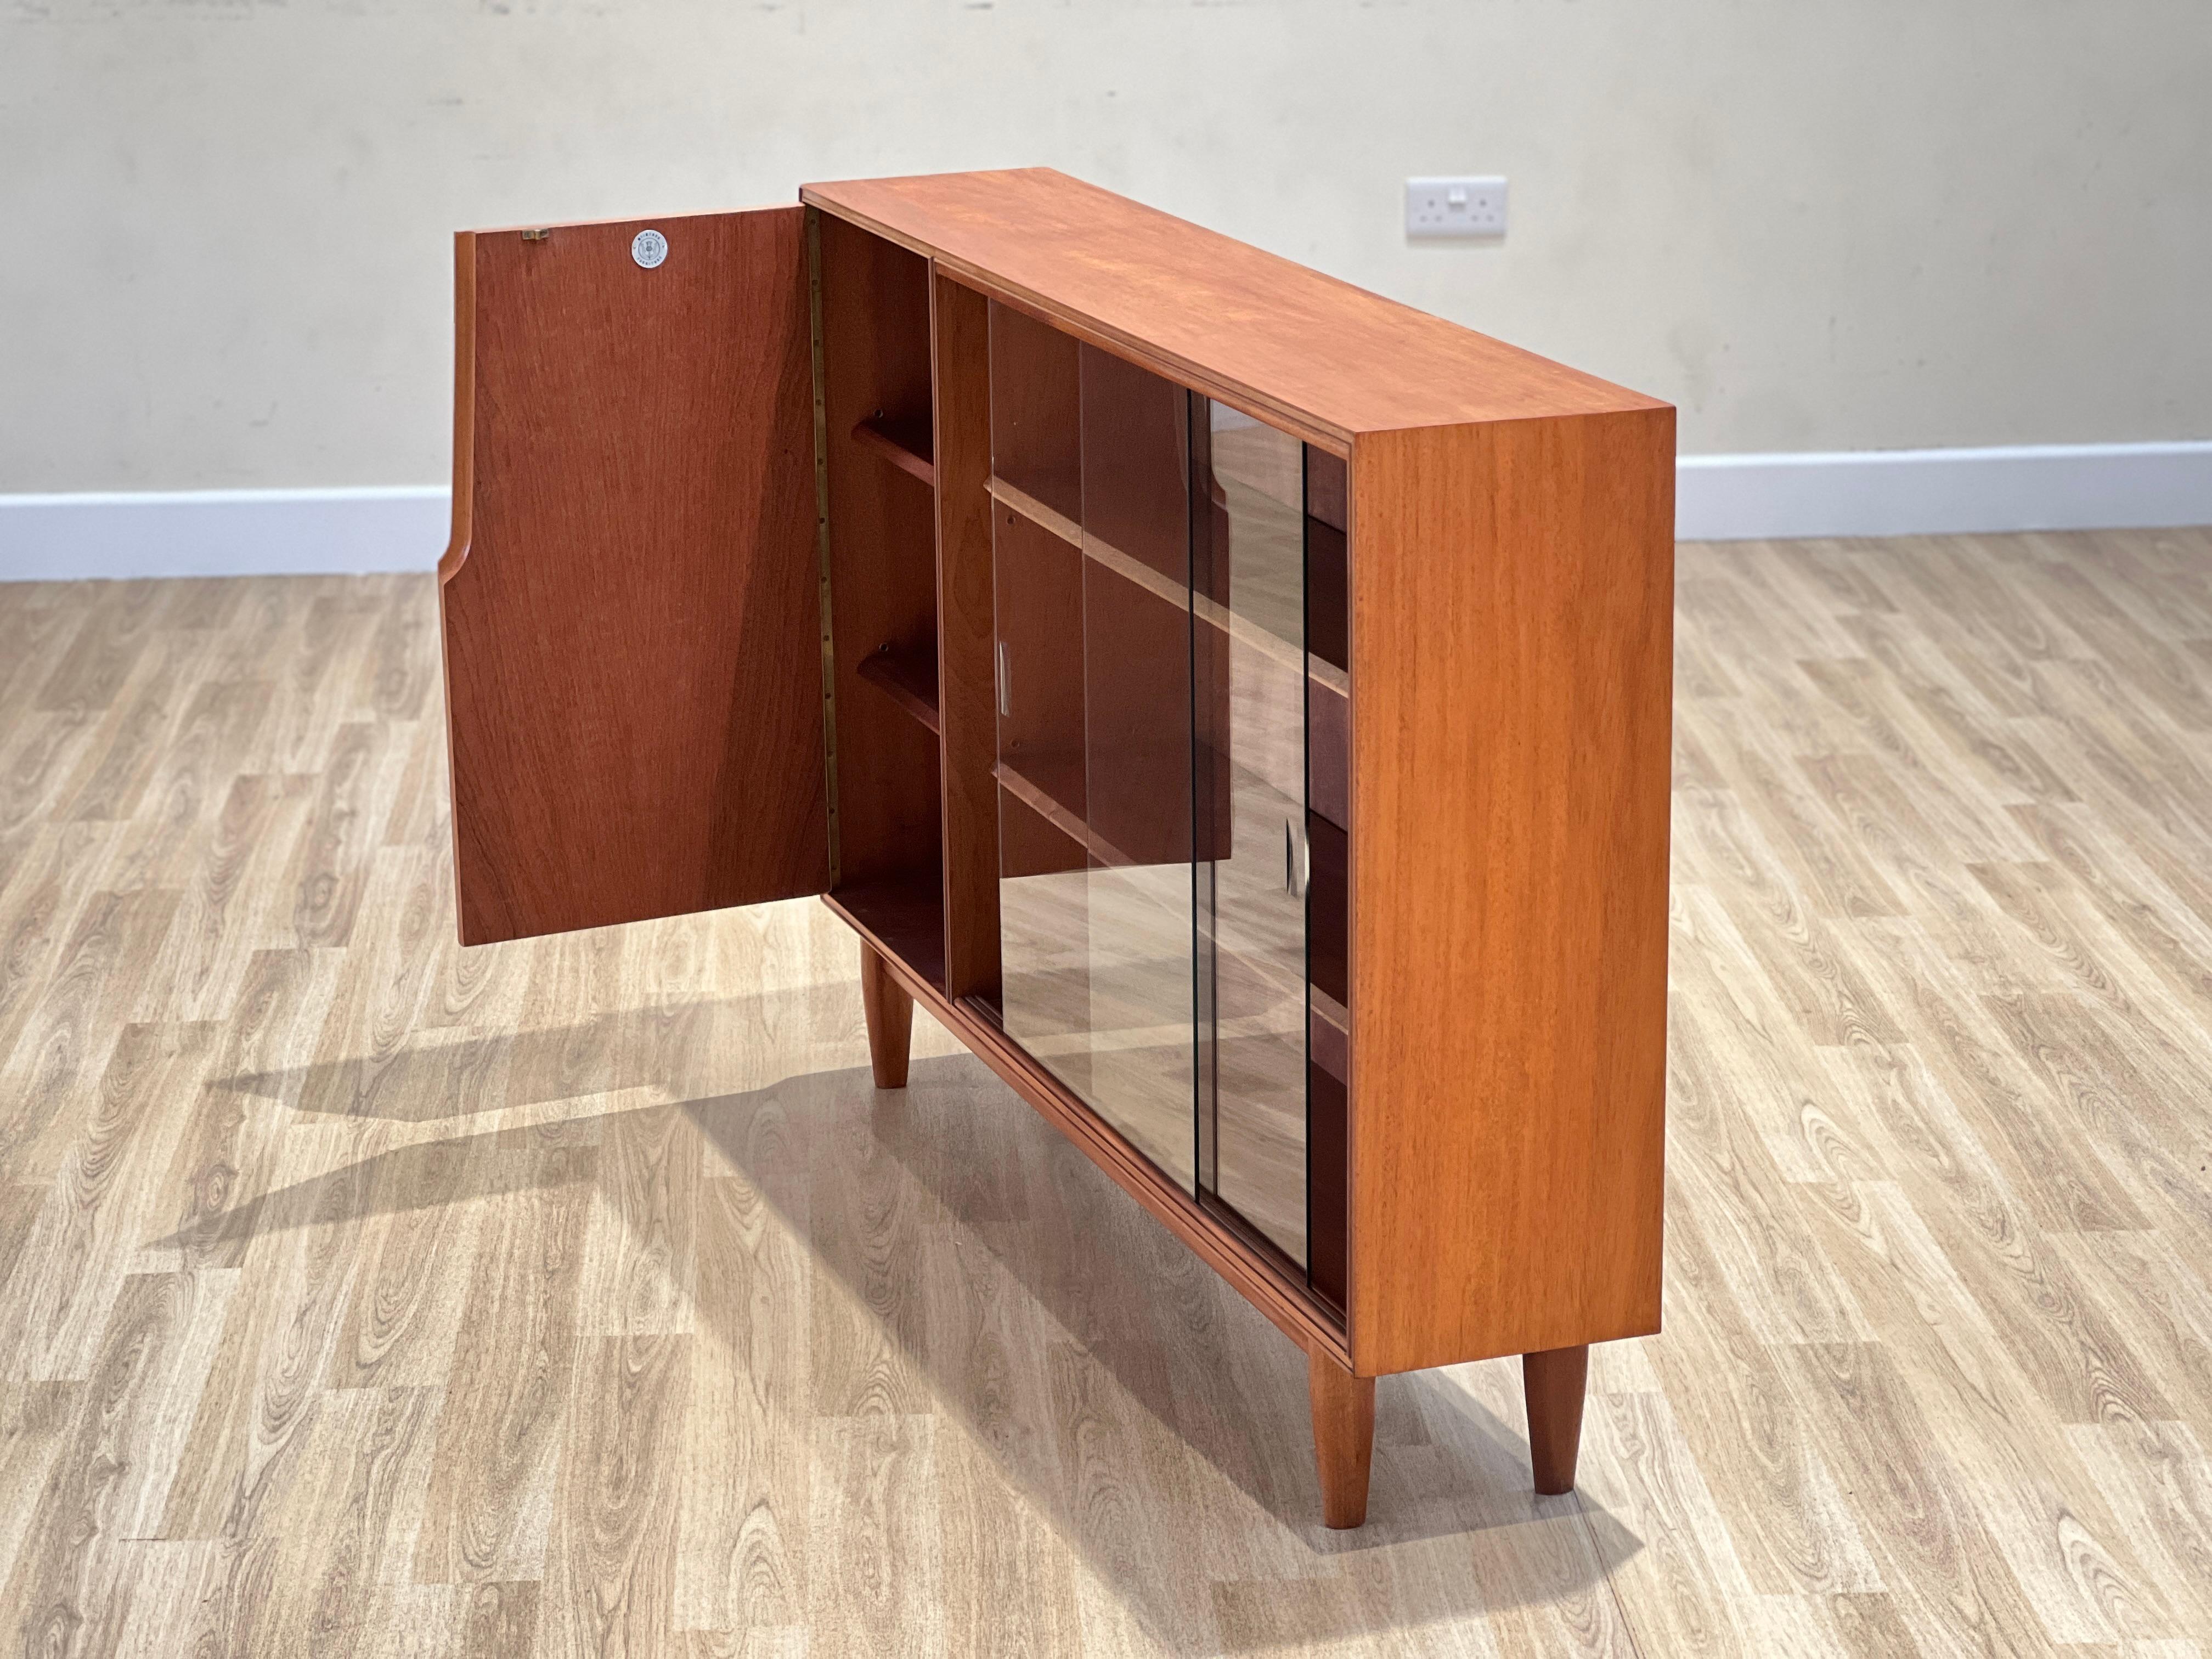 This exquisite display cabinet was created by Tom Robertson for the prestigious Scottish cabinetmaker A.H Mcintosh during the 1960s. It’s crafted from high-quality teakwood and features an elegant glass front panel.

The door on the left-hand side